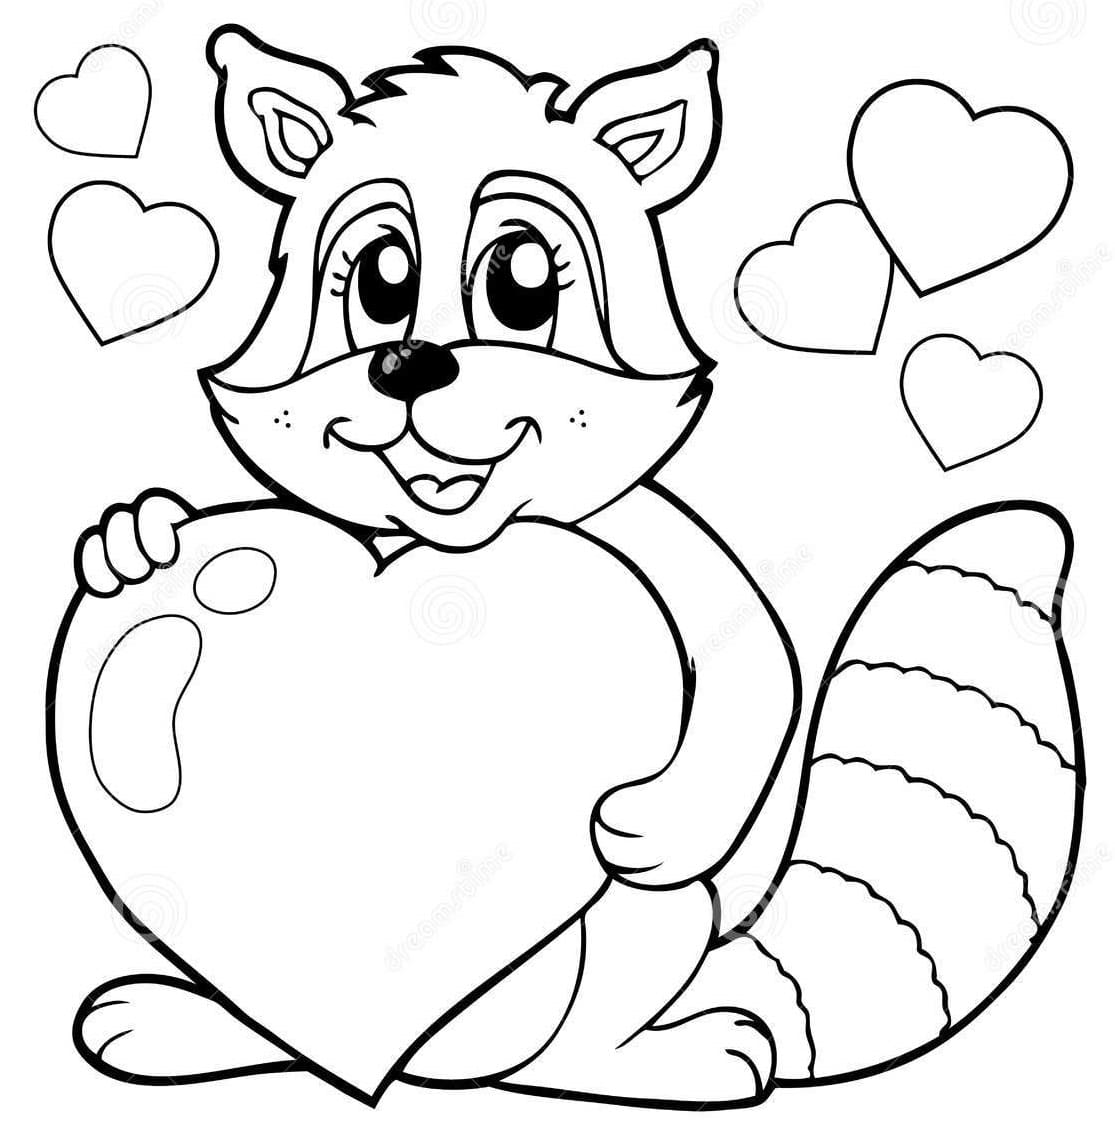 Cartoon Raccoon Lovely For Kids Coloring Page